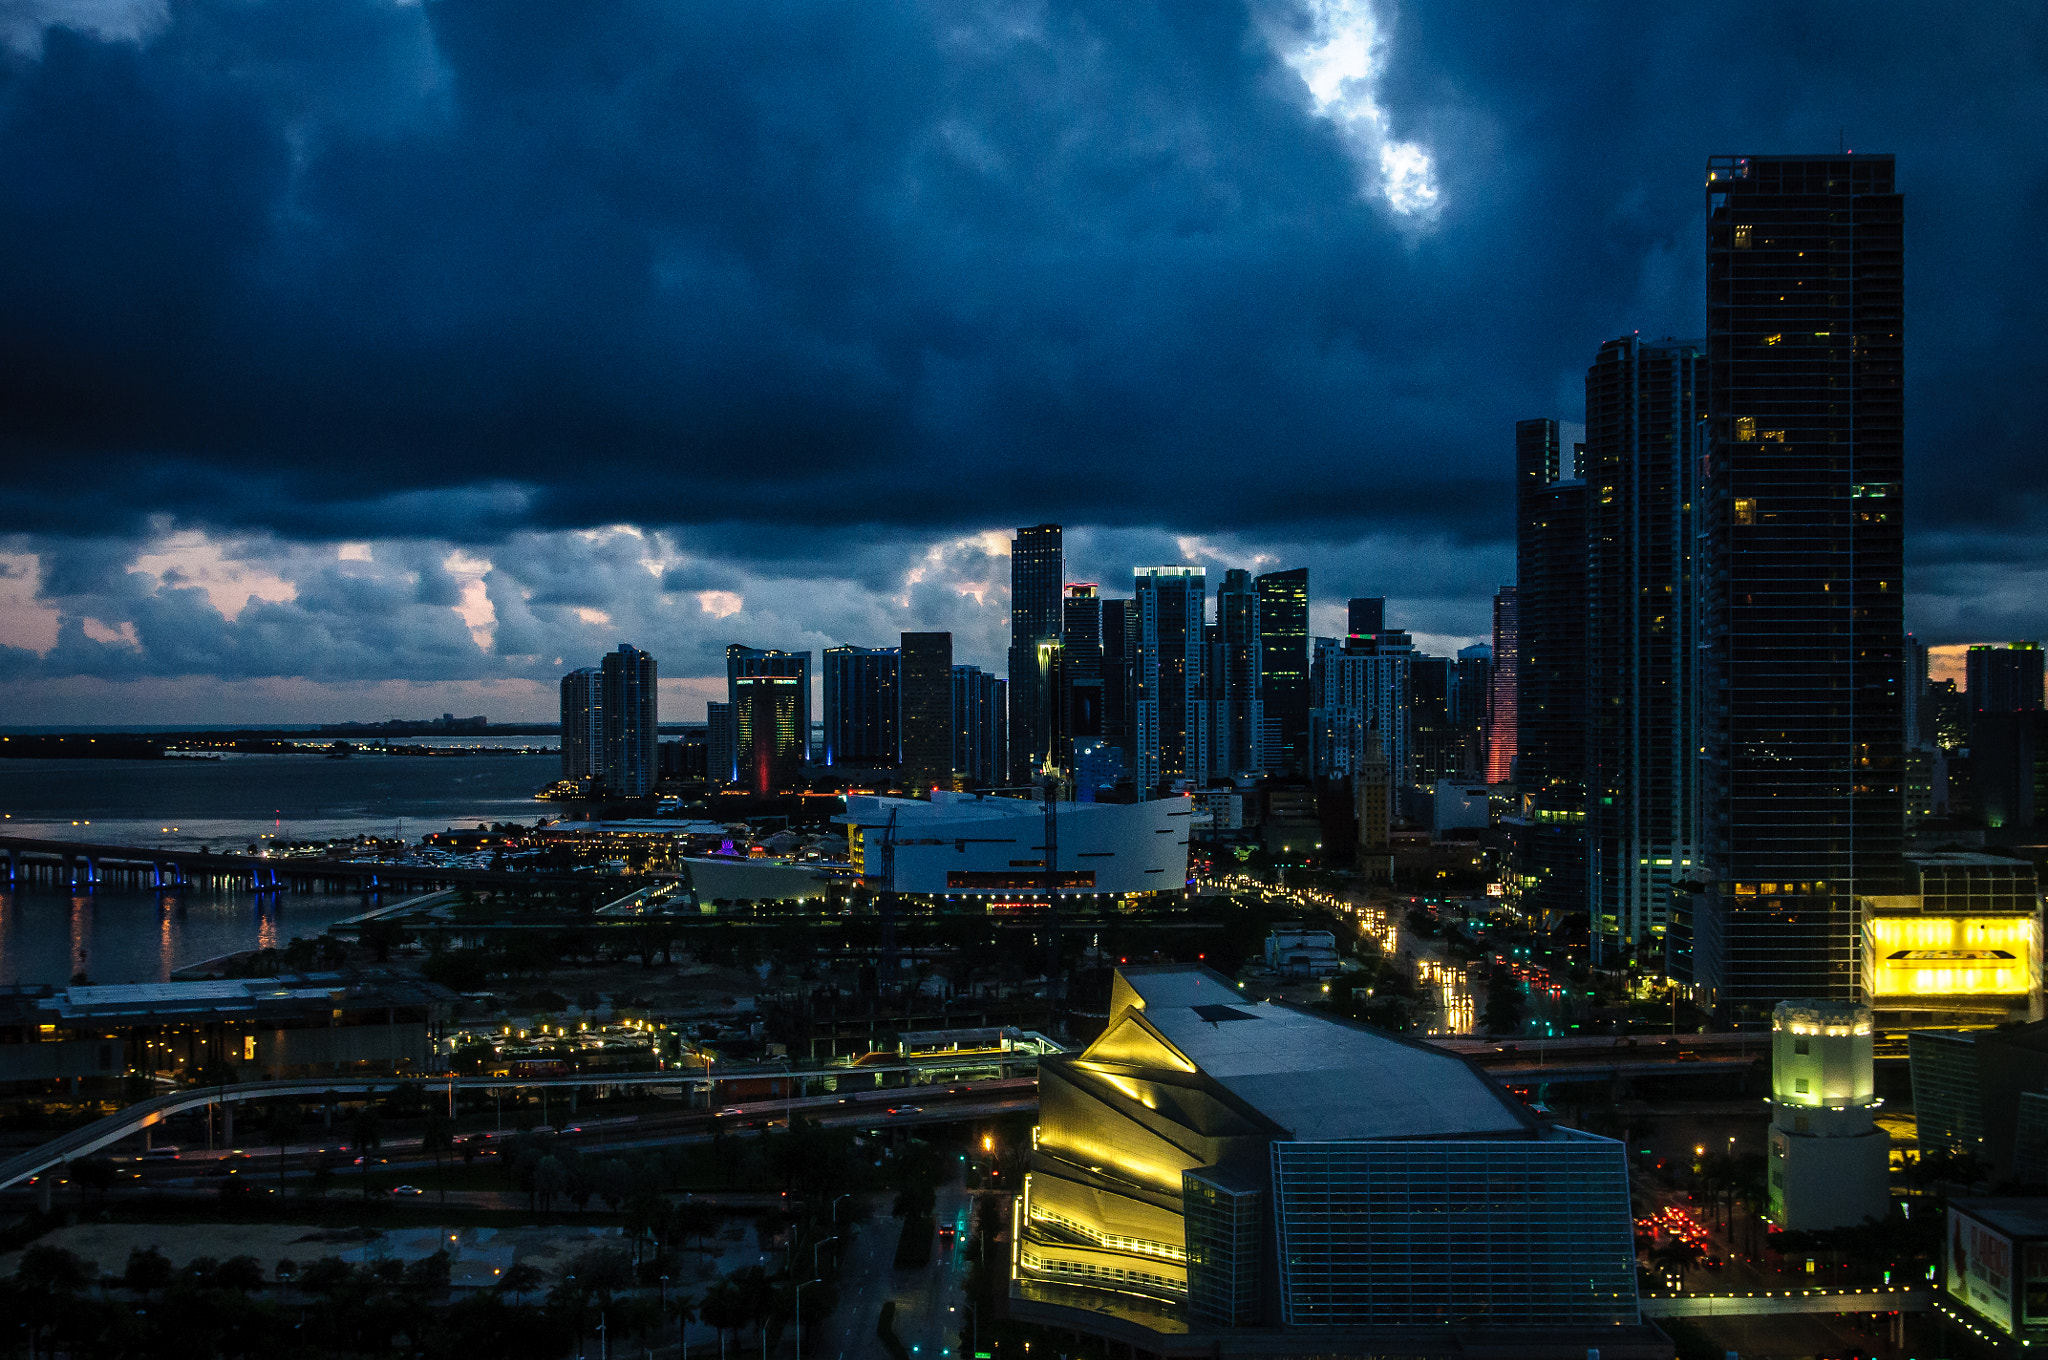 Nikon D300S + Sigma 17-70mm F2.8-4 DC Macro OS HSM | C sample photo. Storm in downtown miami photography